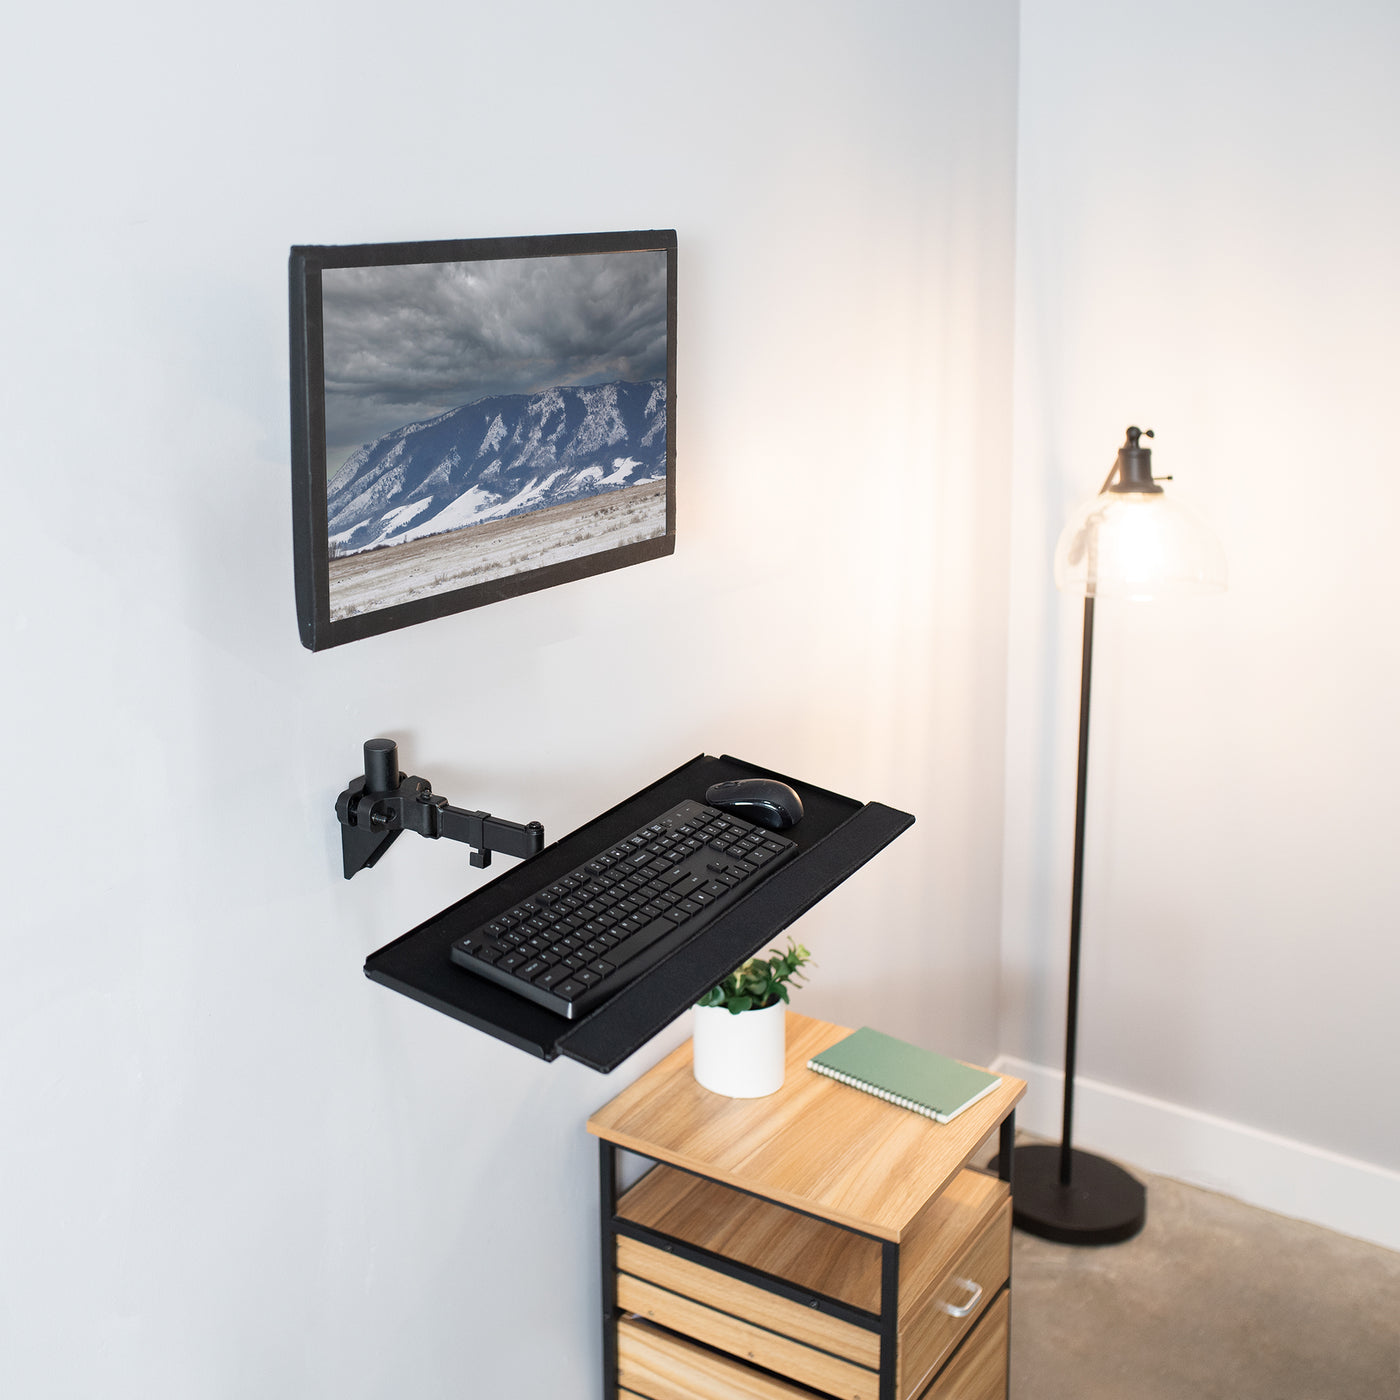  Universal mount is ideal for adding a keyboard tray to an existing monitor stand or any pole within the diameter range.